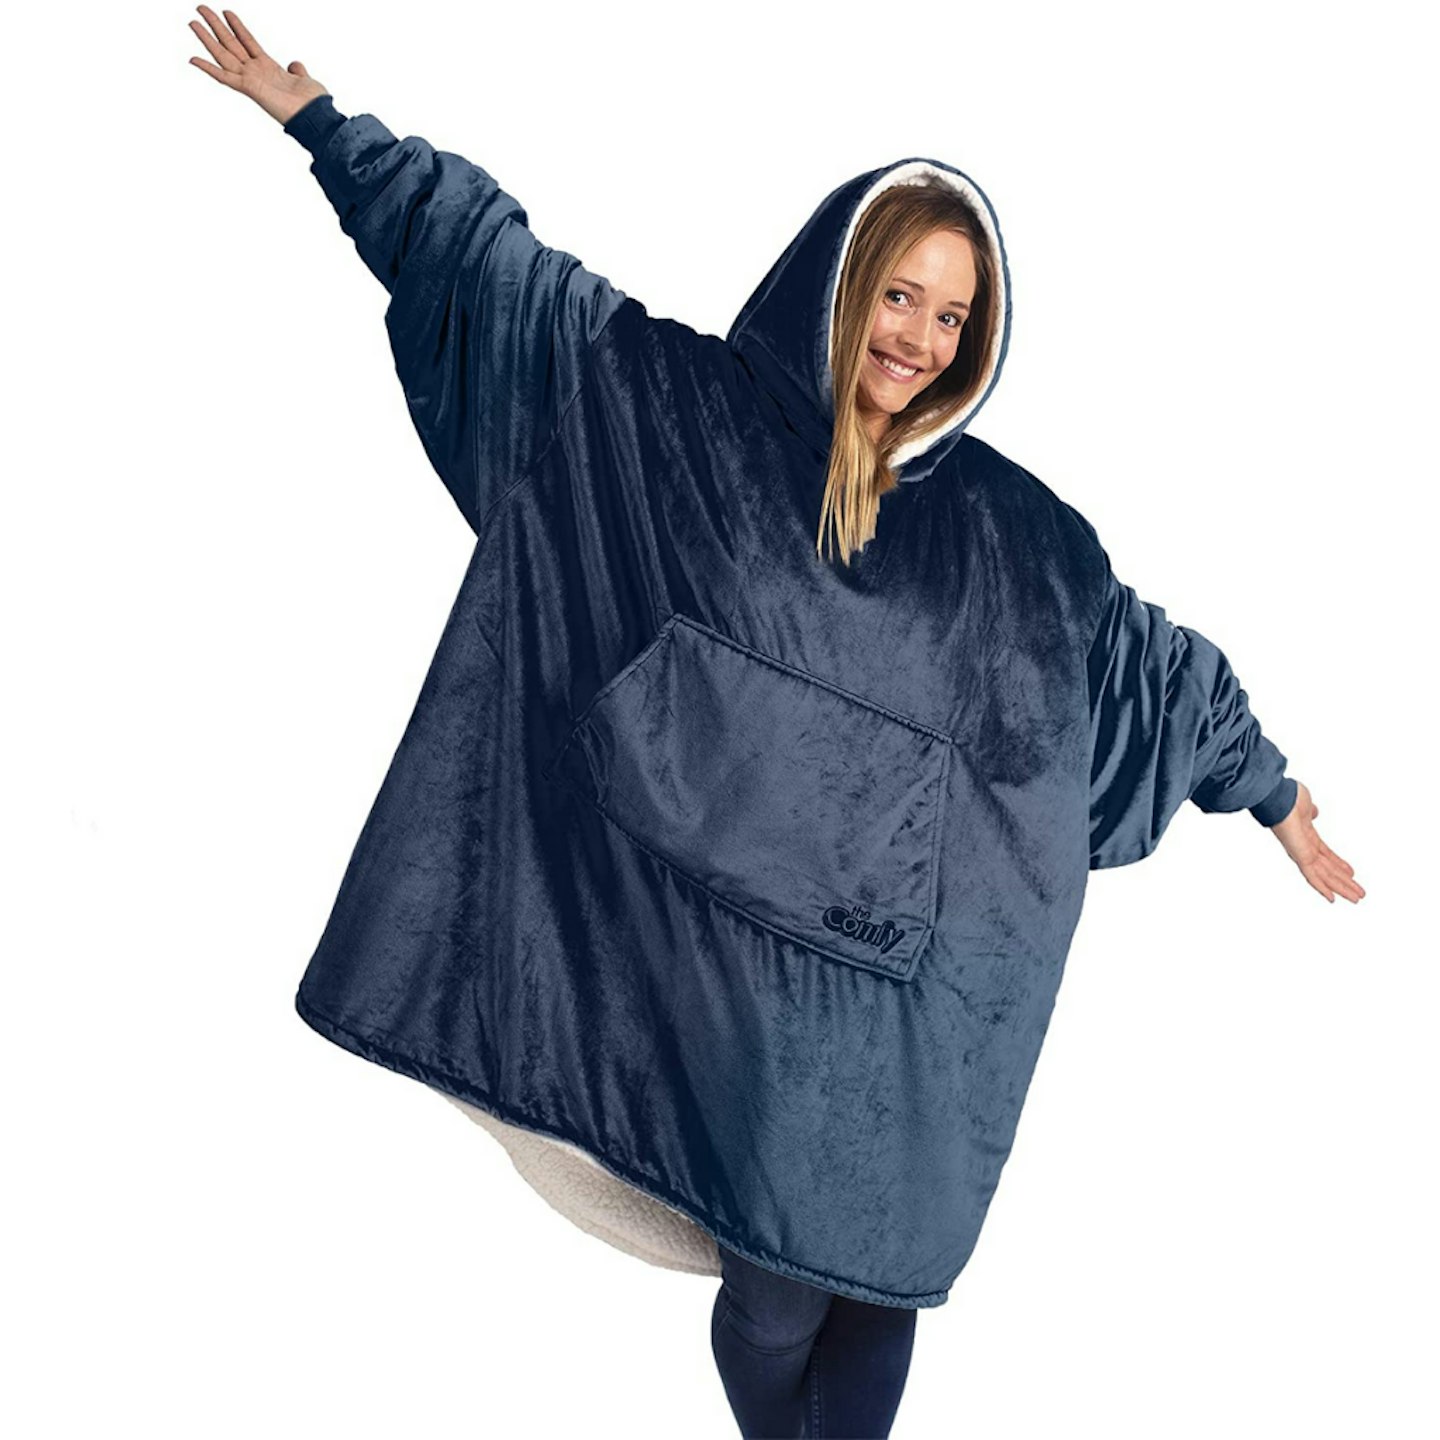 The Comfy Original oversized wearable sherpa blanket